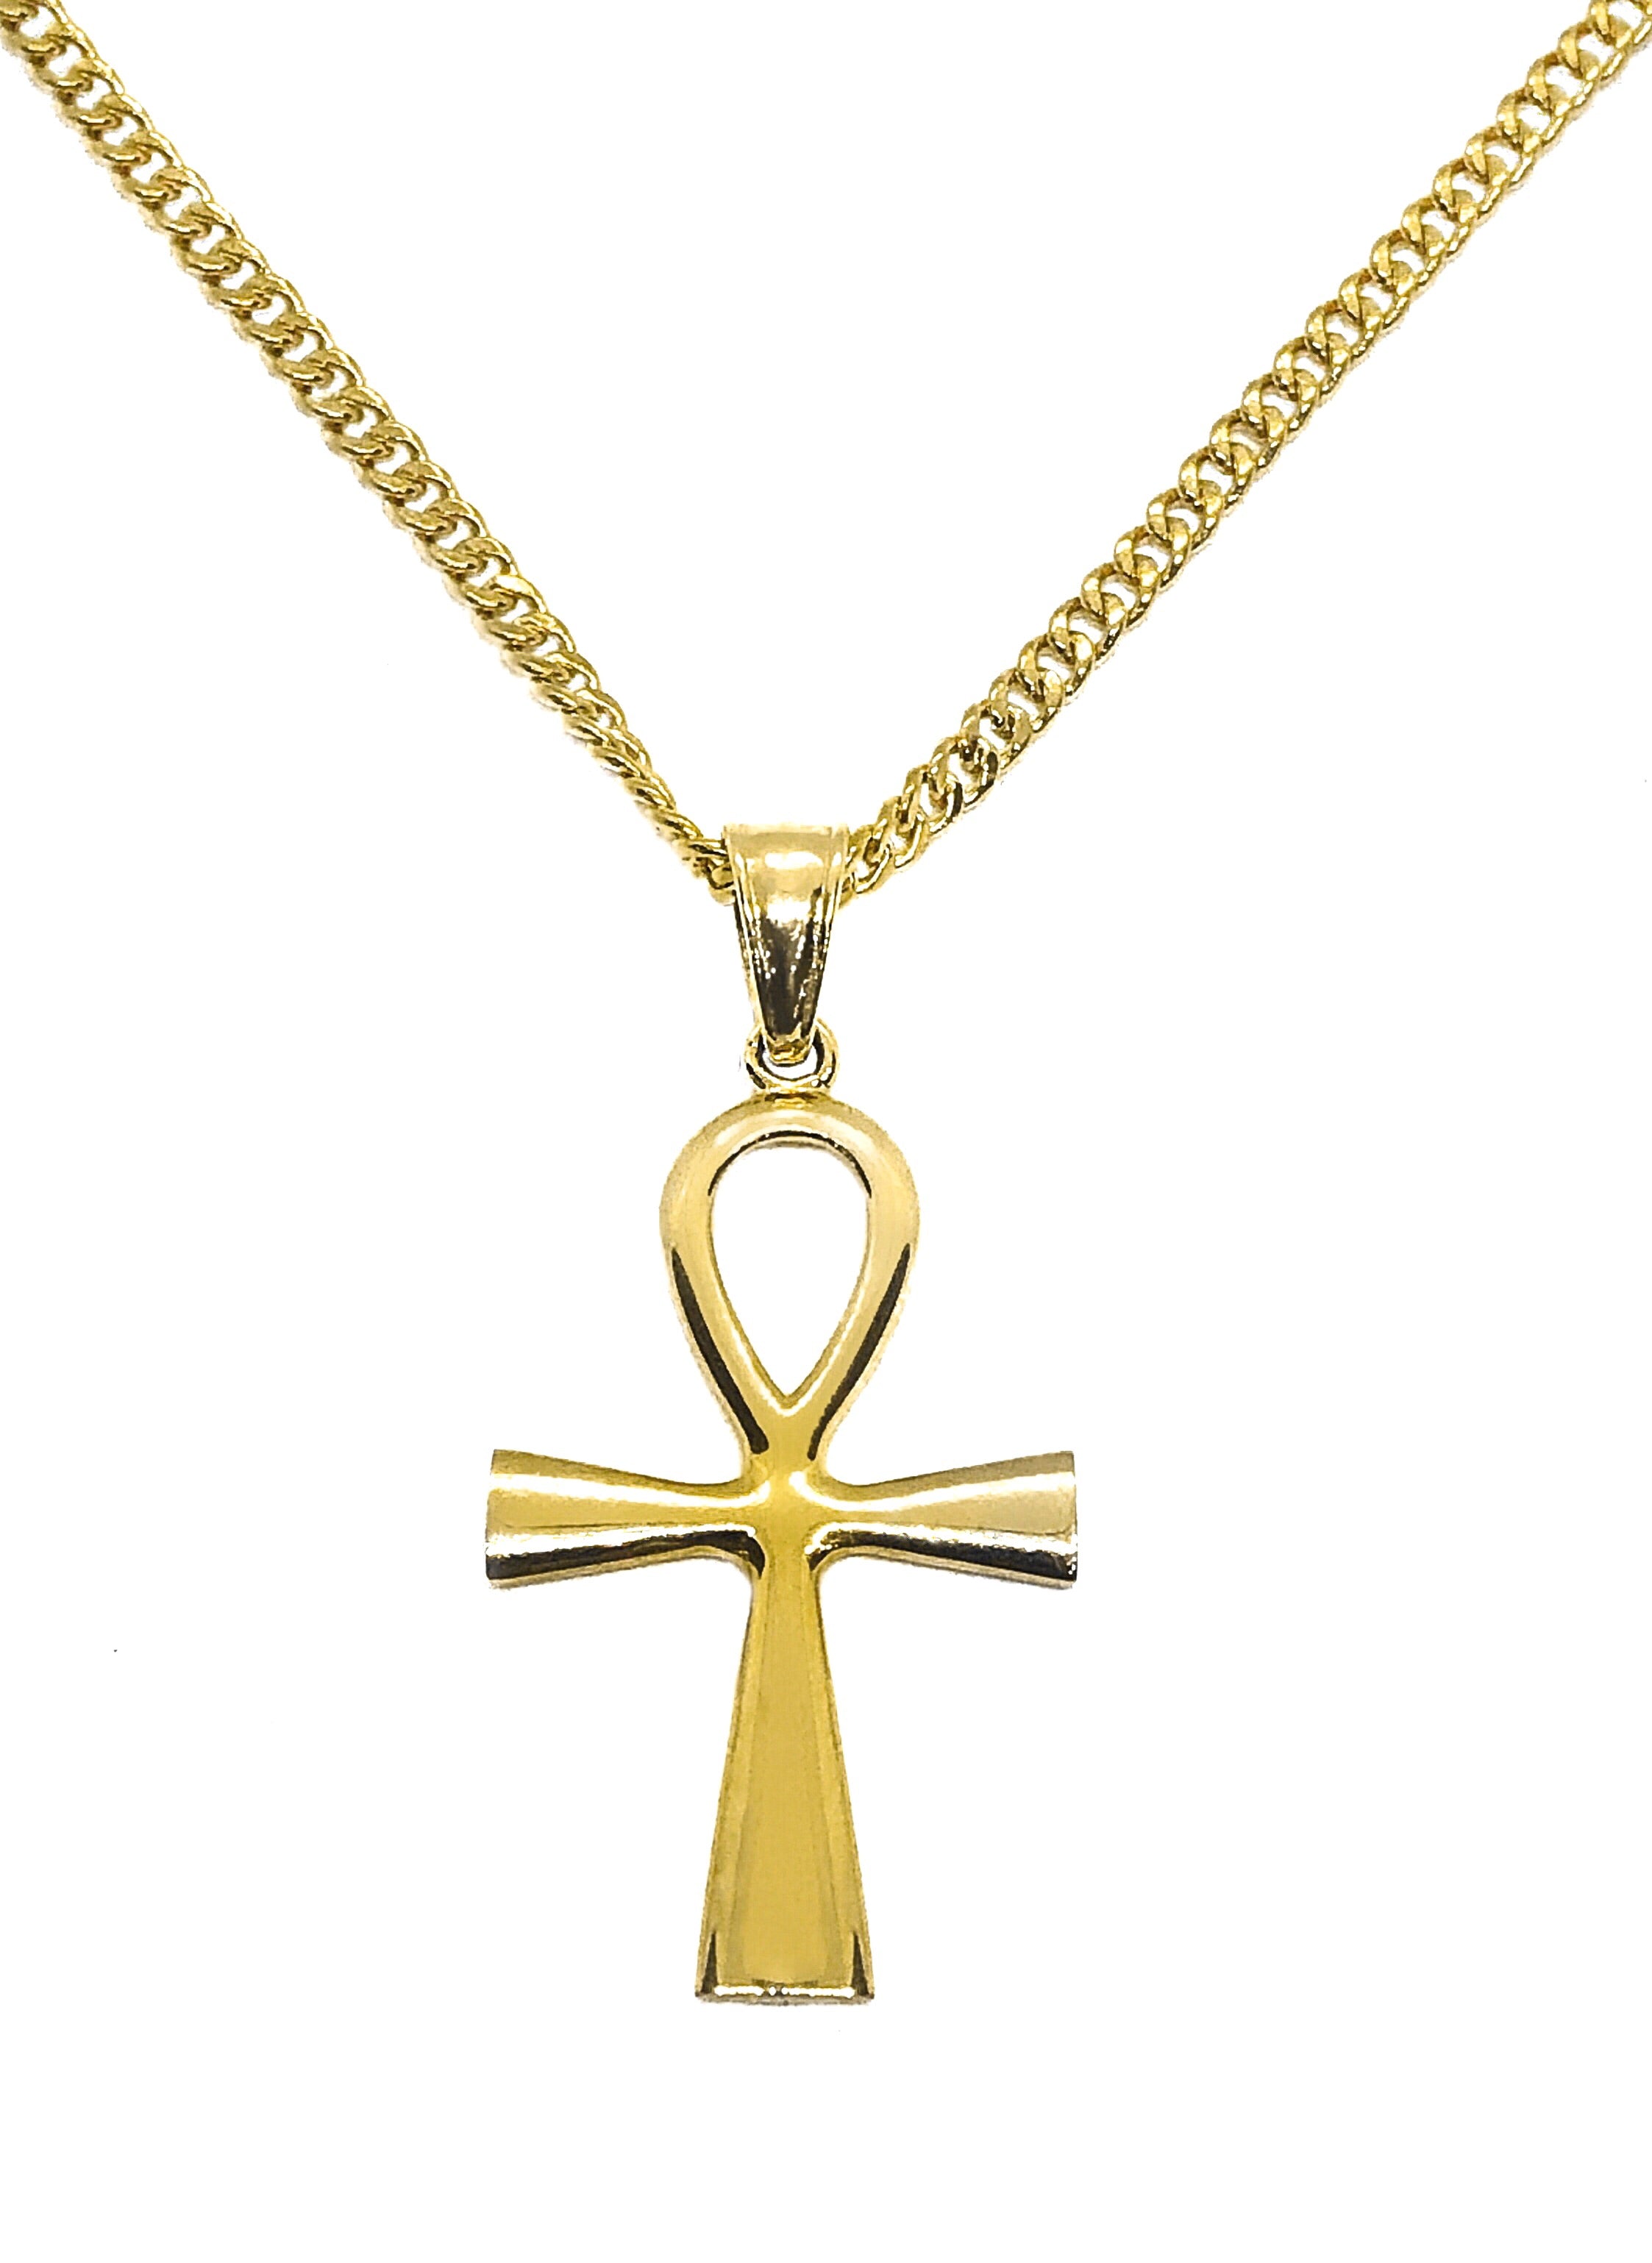 14K YELLOW GOLD ANKH NECKLACE